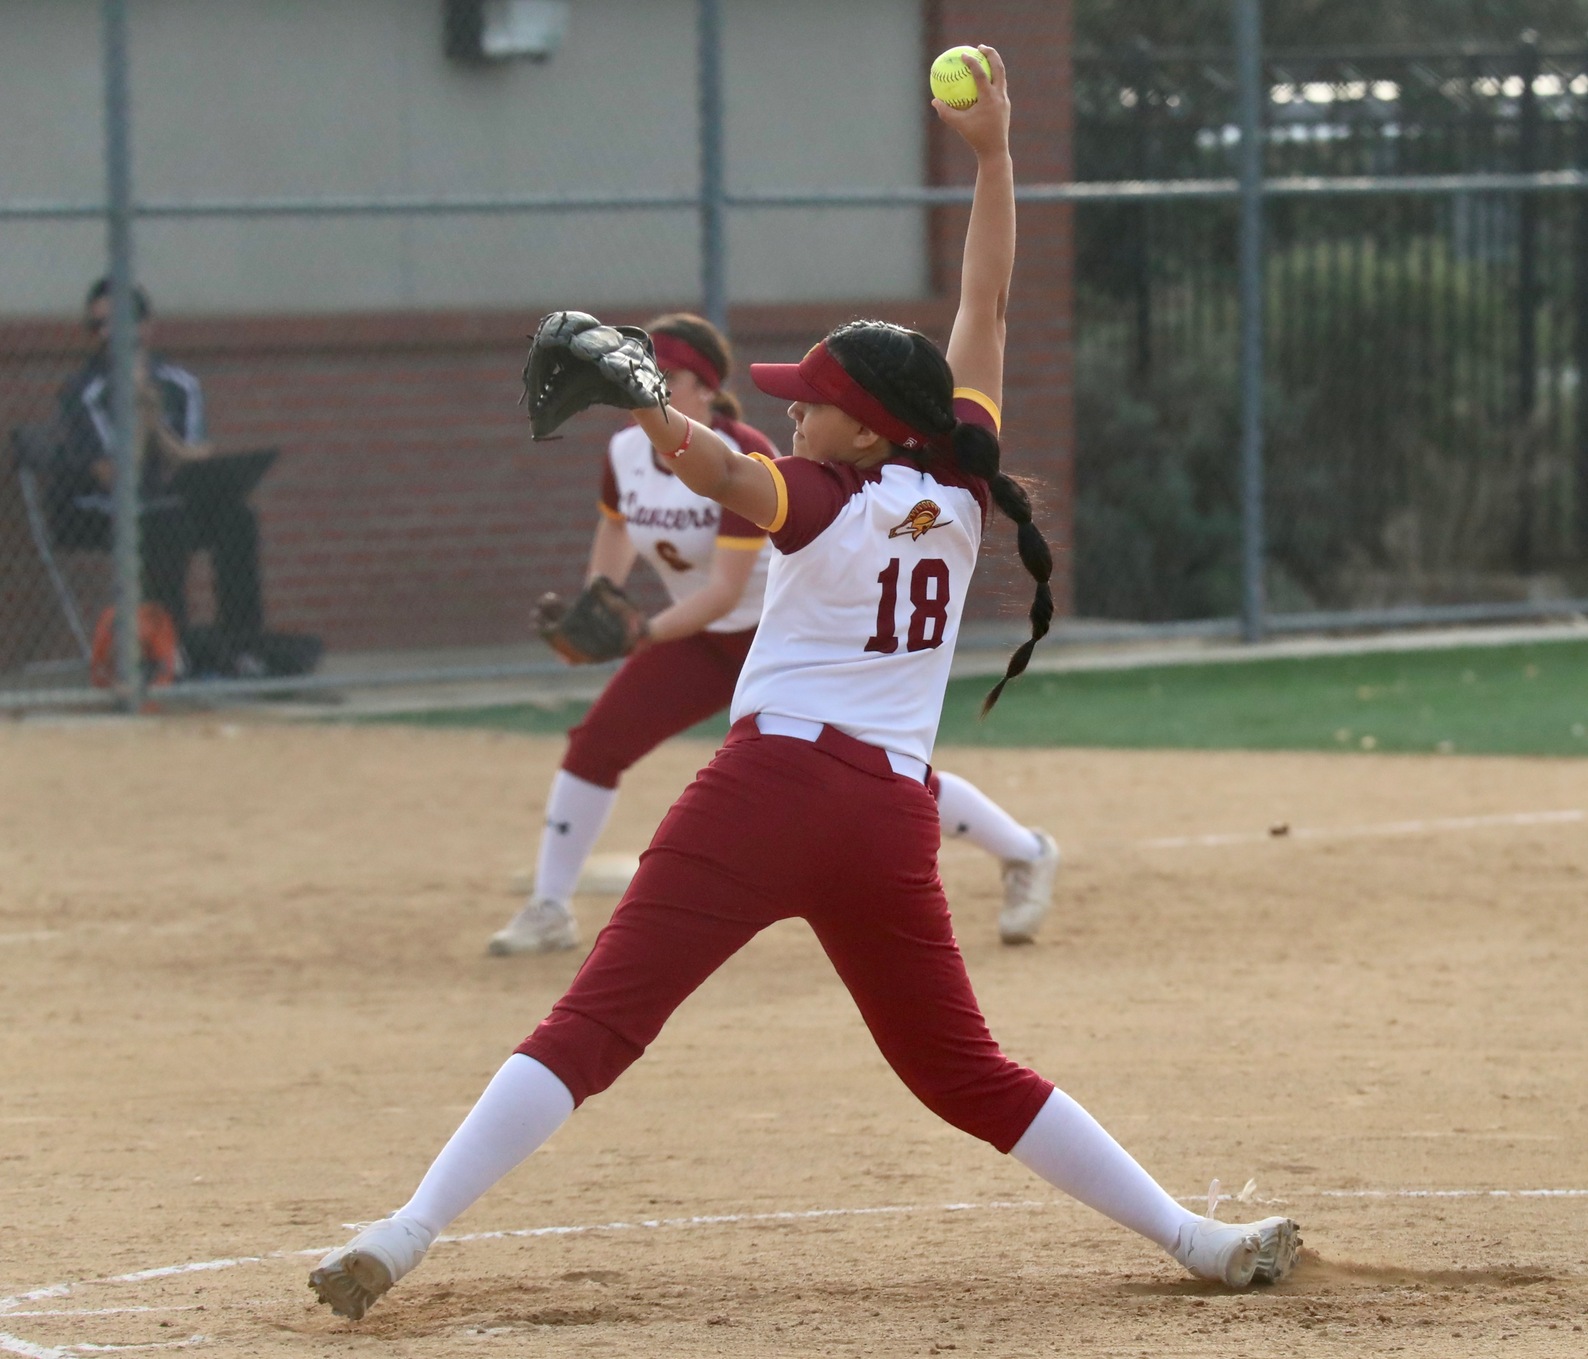 Elena Bahnimtewa delivers a pitch during her shutout over Compton on Thursday, photo by Michael Watkins.